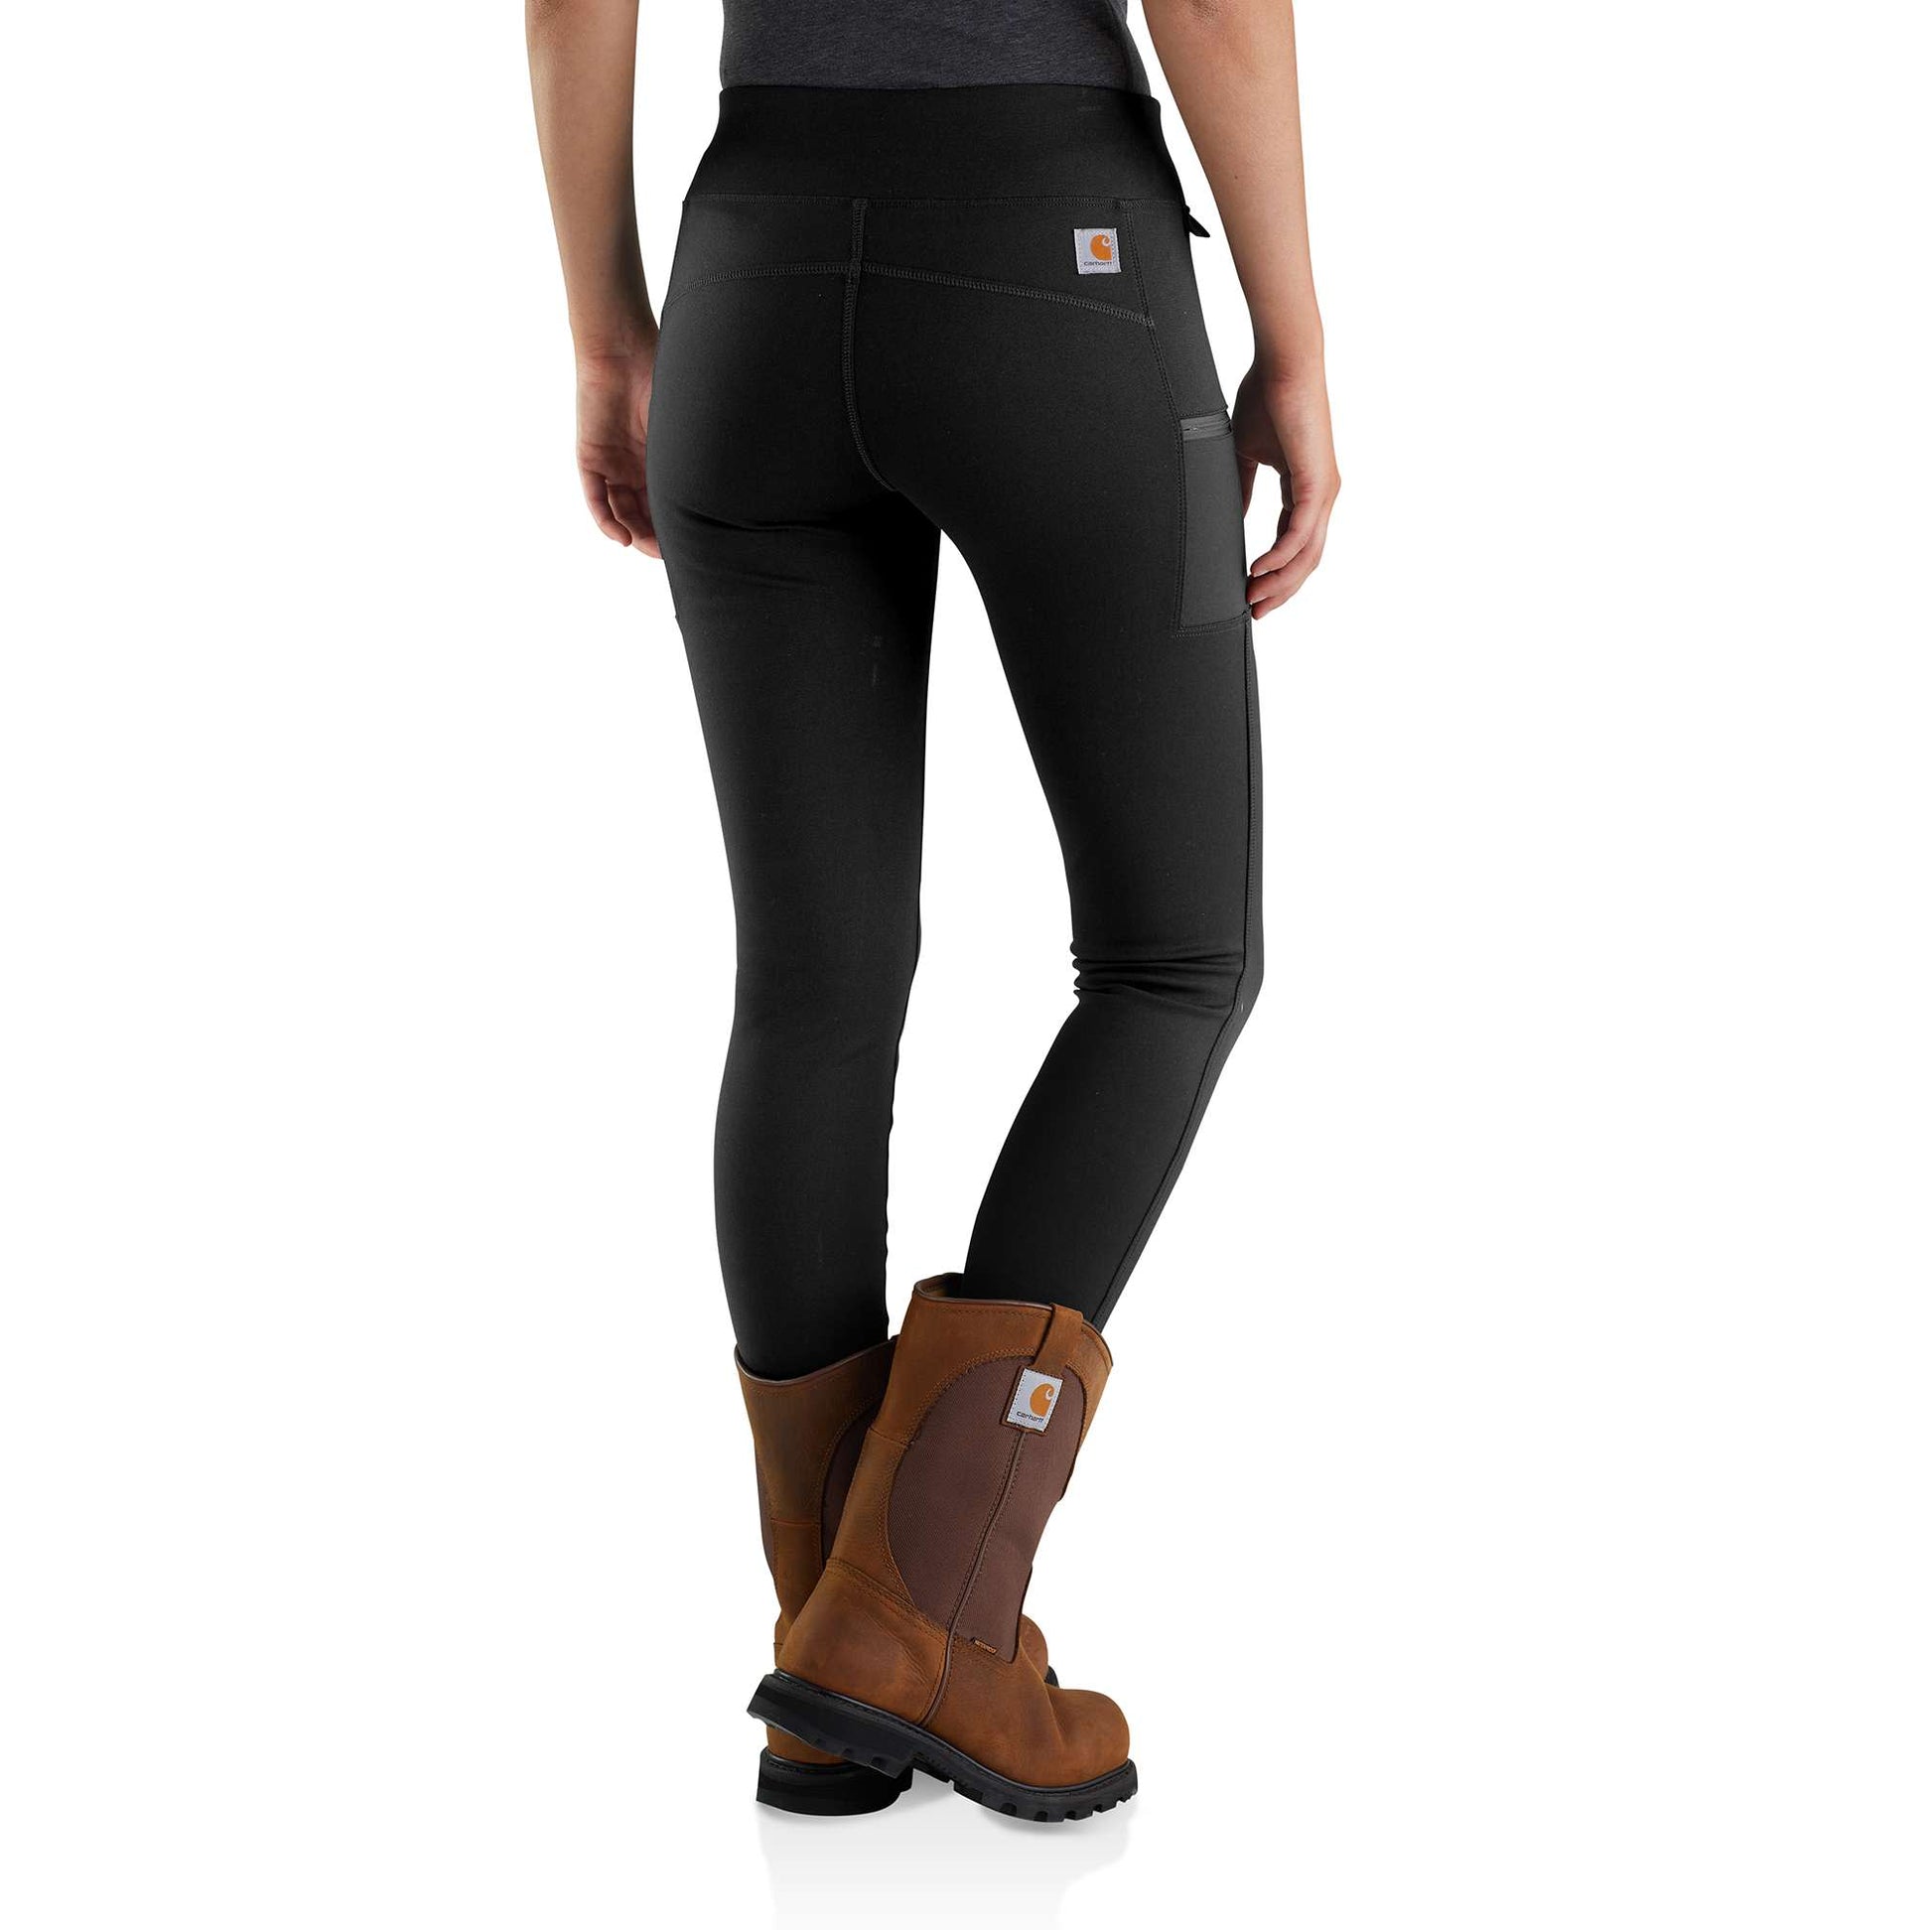 Carhartt FORCE FITTED LIGHTWEIGHT UTILITY LEGGING Red Size XS - $40 (33%  Off Retail) New With Tags - From Maria